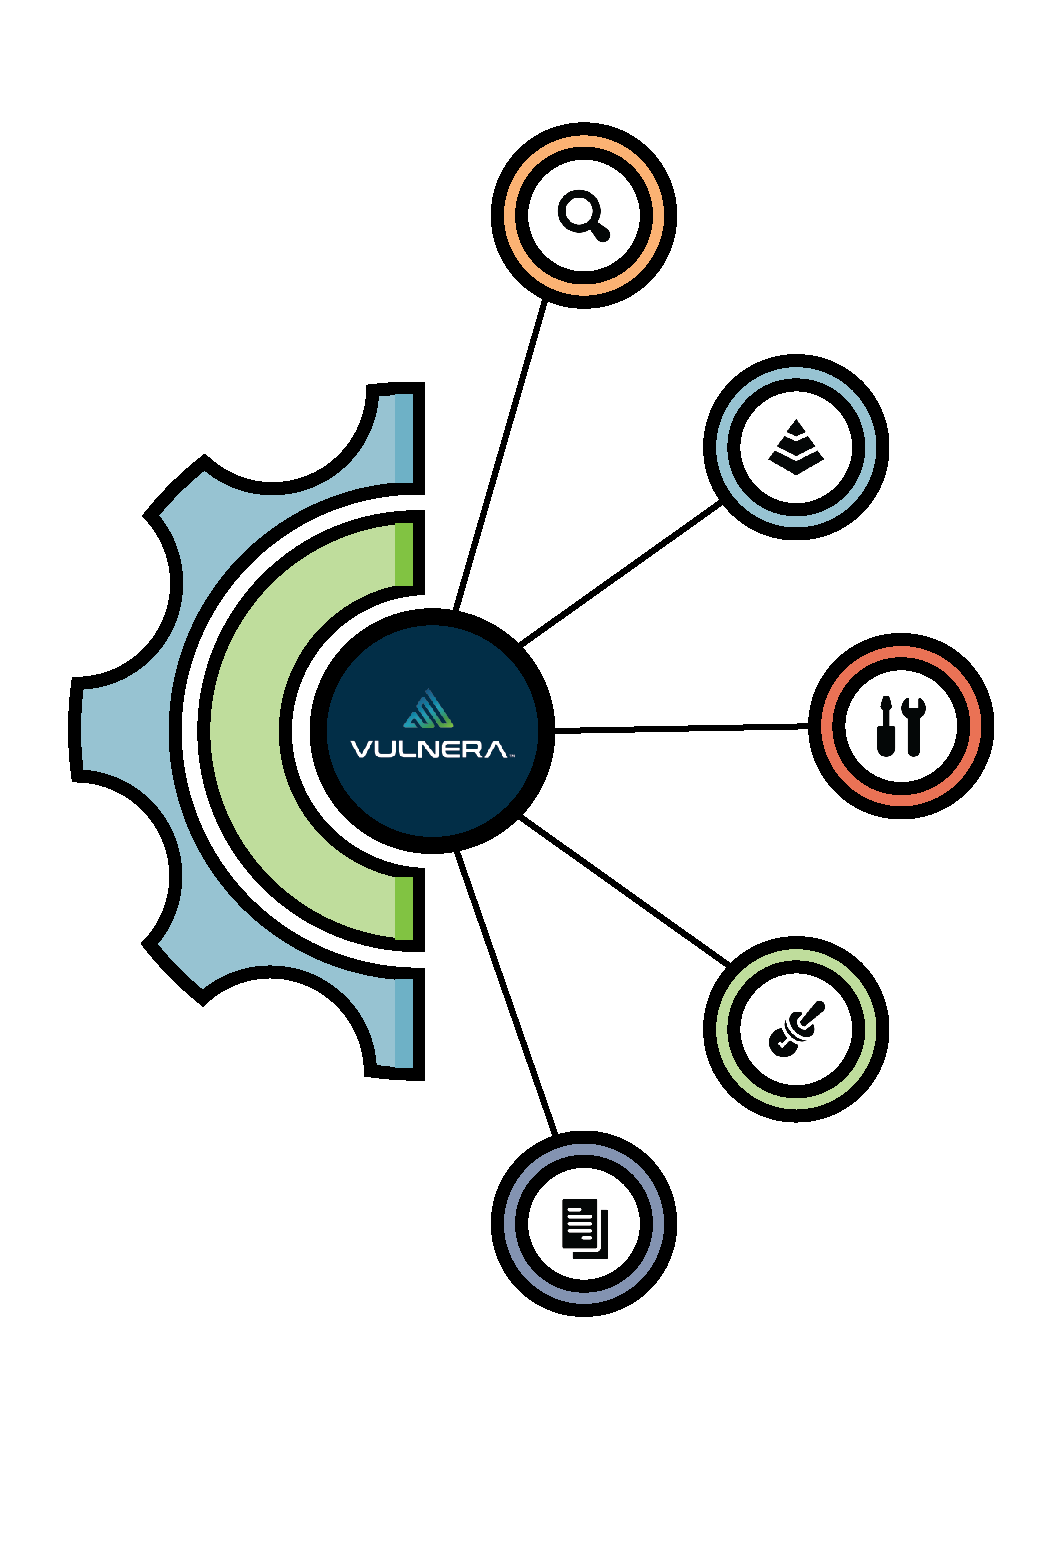 Discovery, assessment, threat prioritization and remediation tracking in the VULNERA solution.